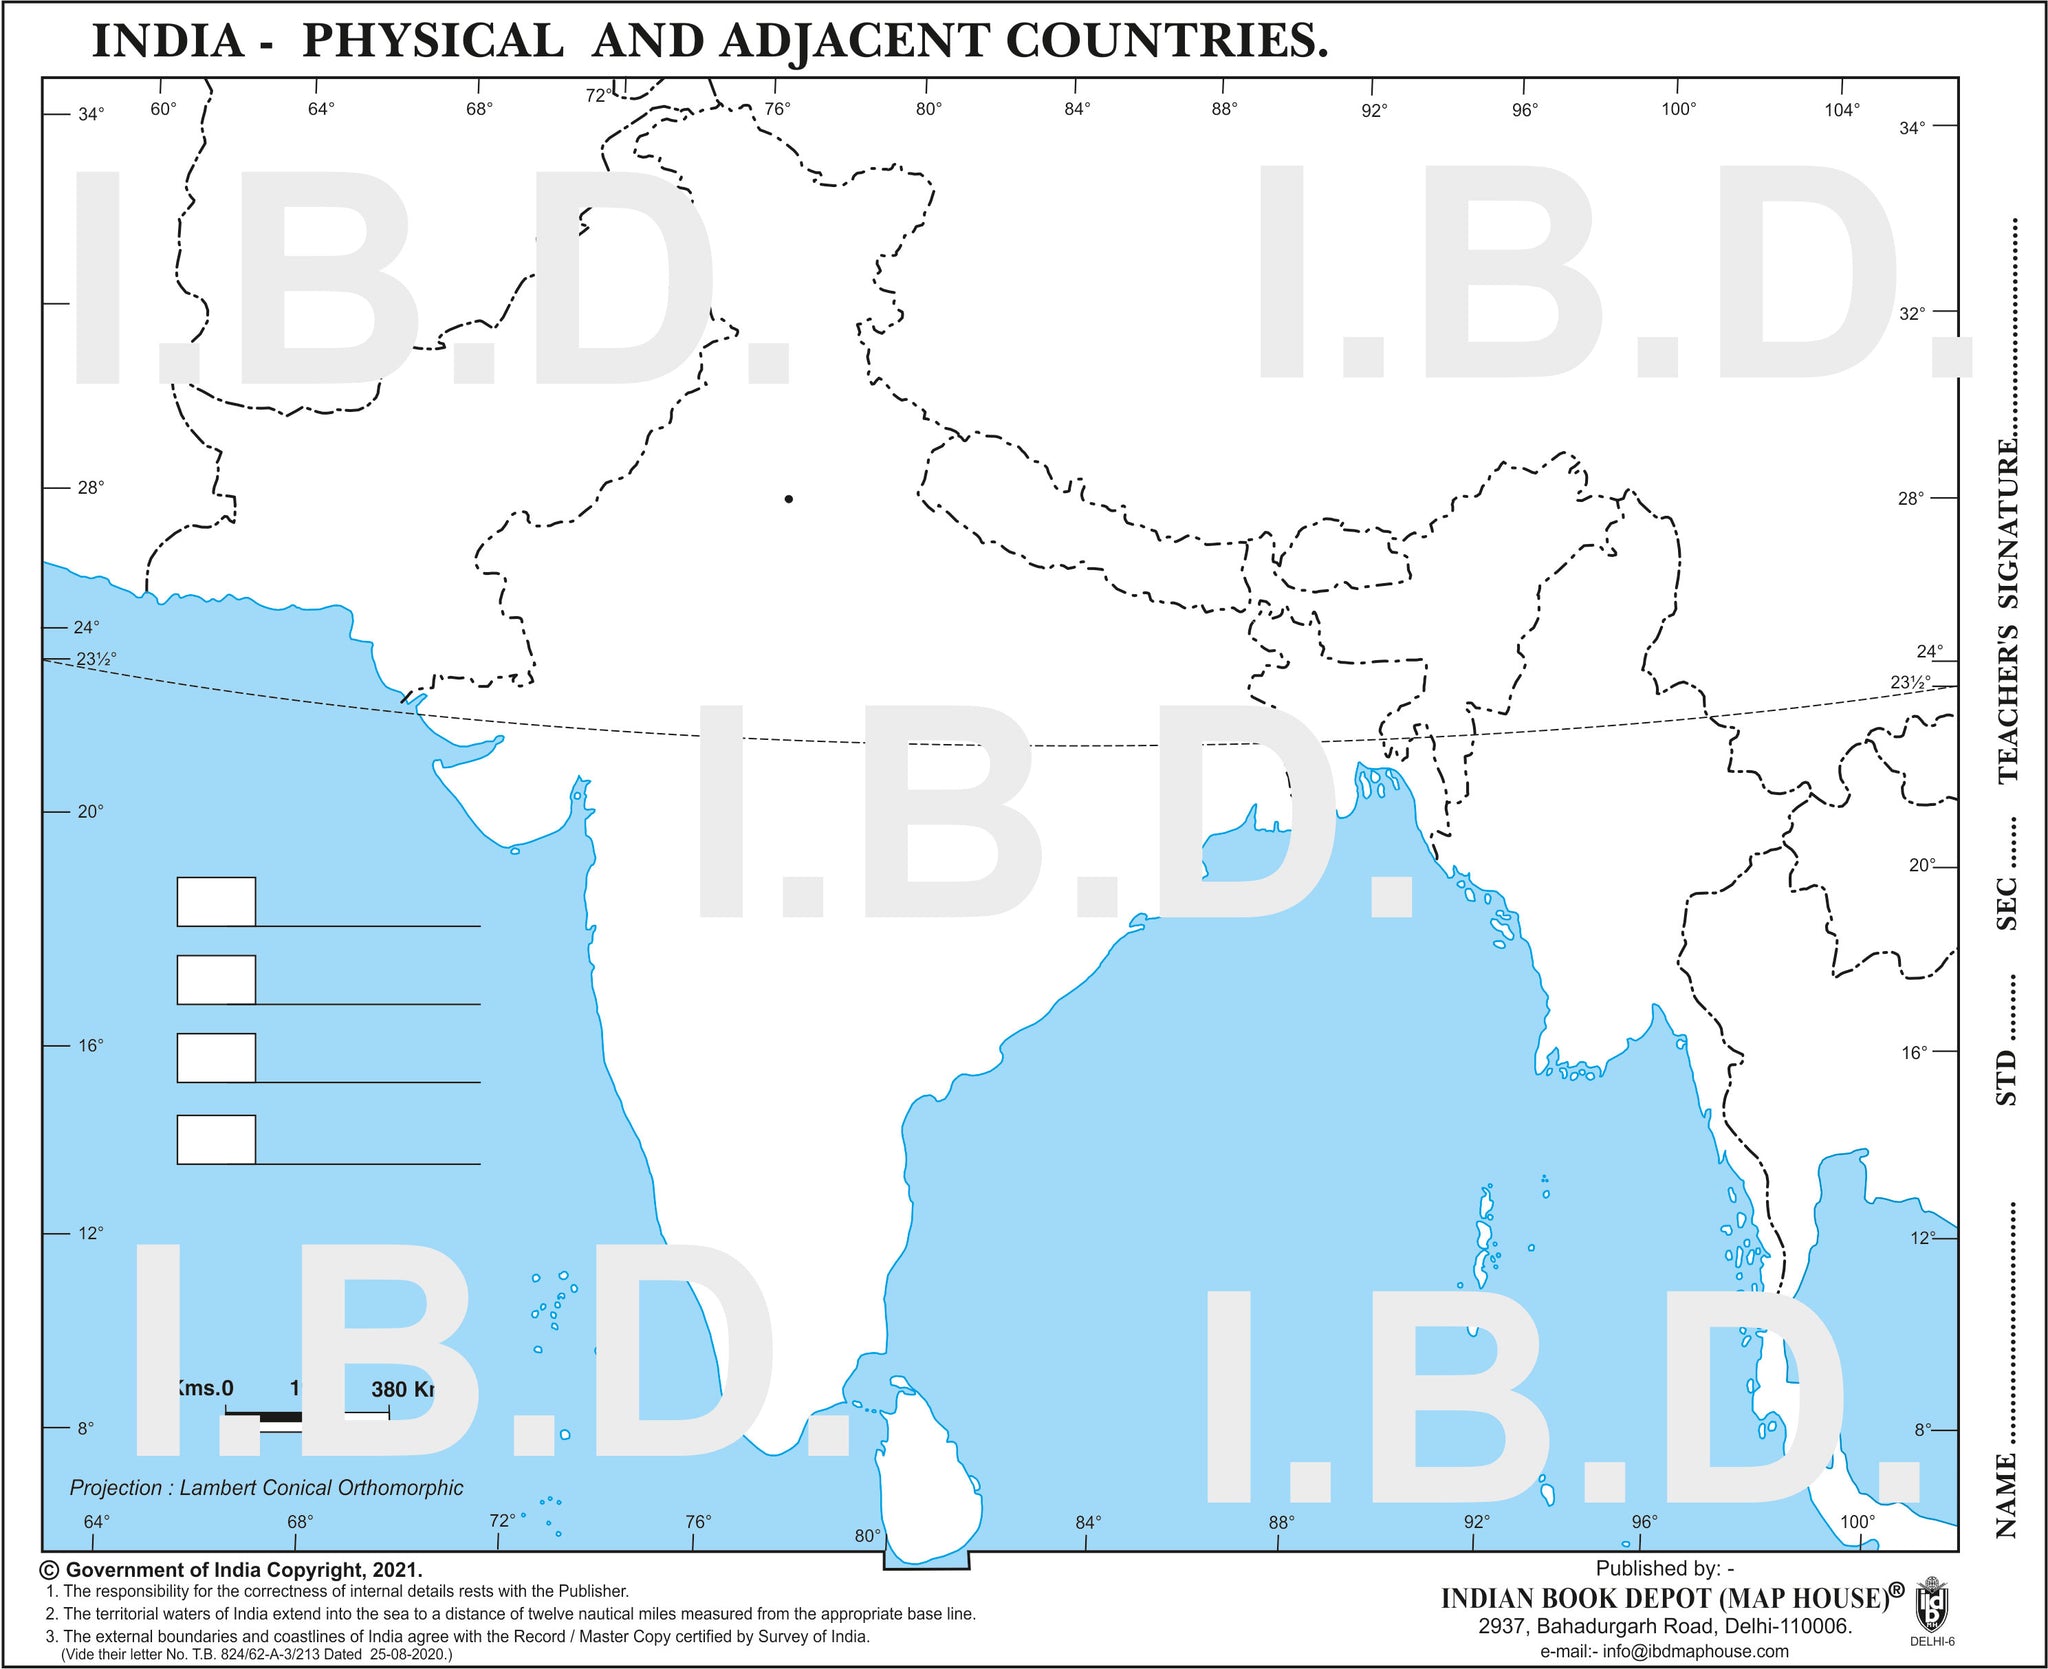 India Geography/India Country 